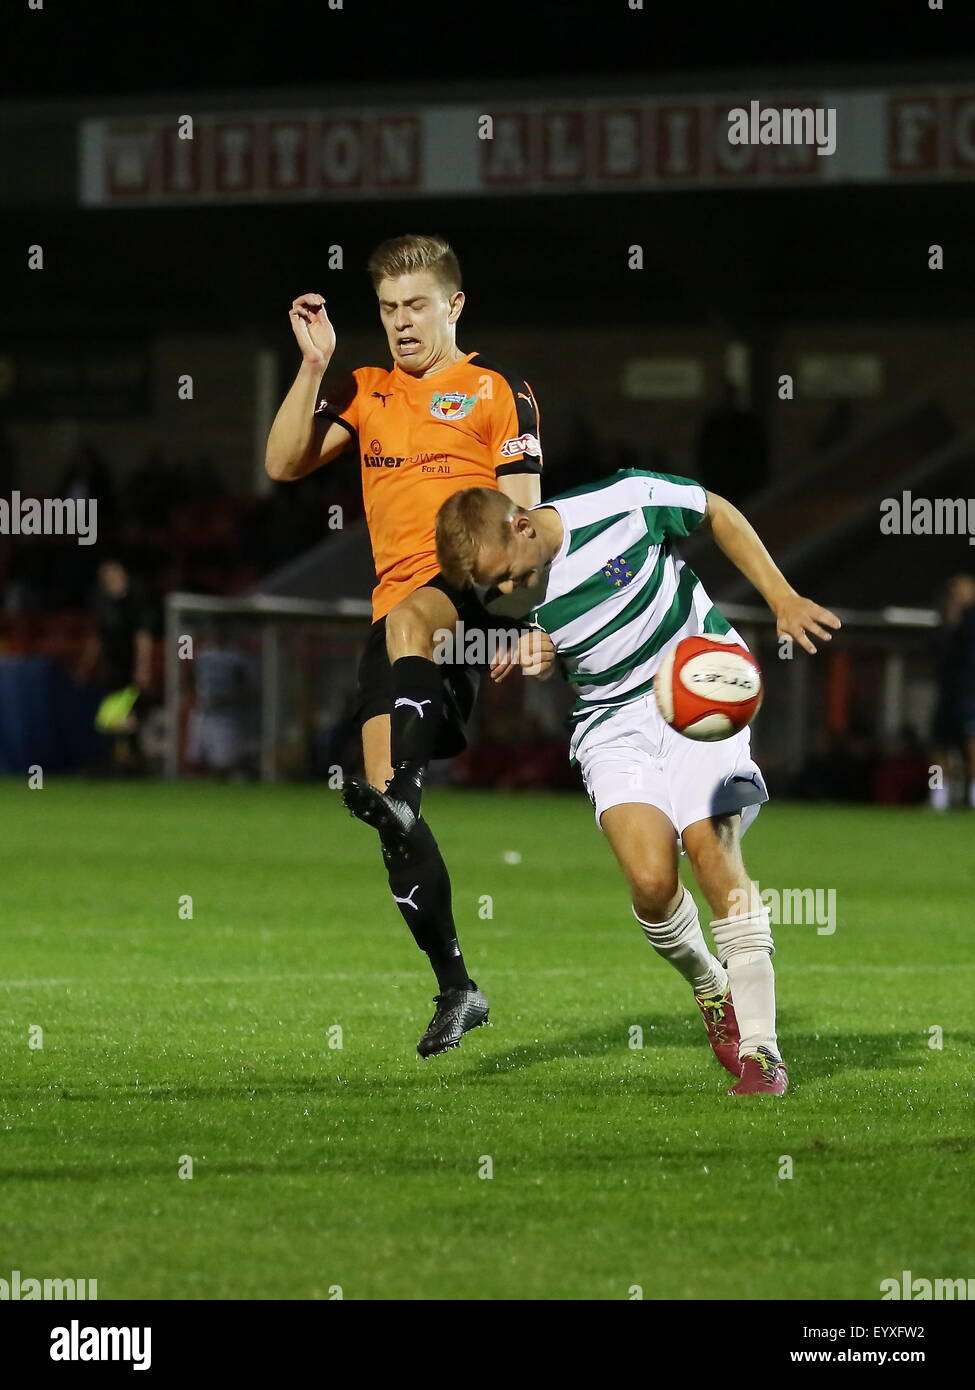 Northwich, Cheshire, UK. 4th August, 2015. Northwich Victoria beat Nantwich Town 2-0 in a pre season friendly held at Witton Albion's Wincham Park in Northwich. Nantwich Town's Lewis Short in a tackle. Credit:  Simon Newbury/Alamy Live News Stock Photo